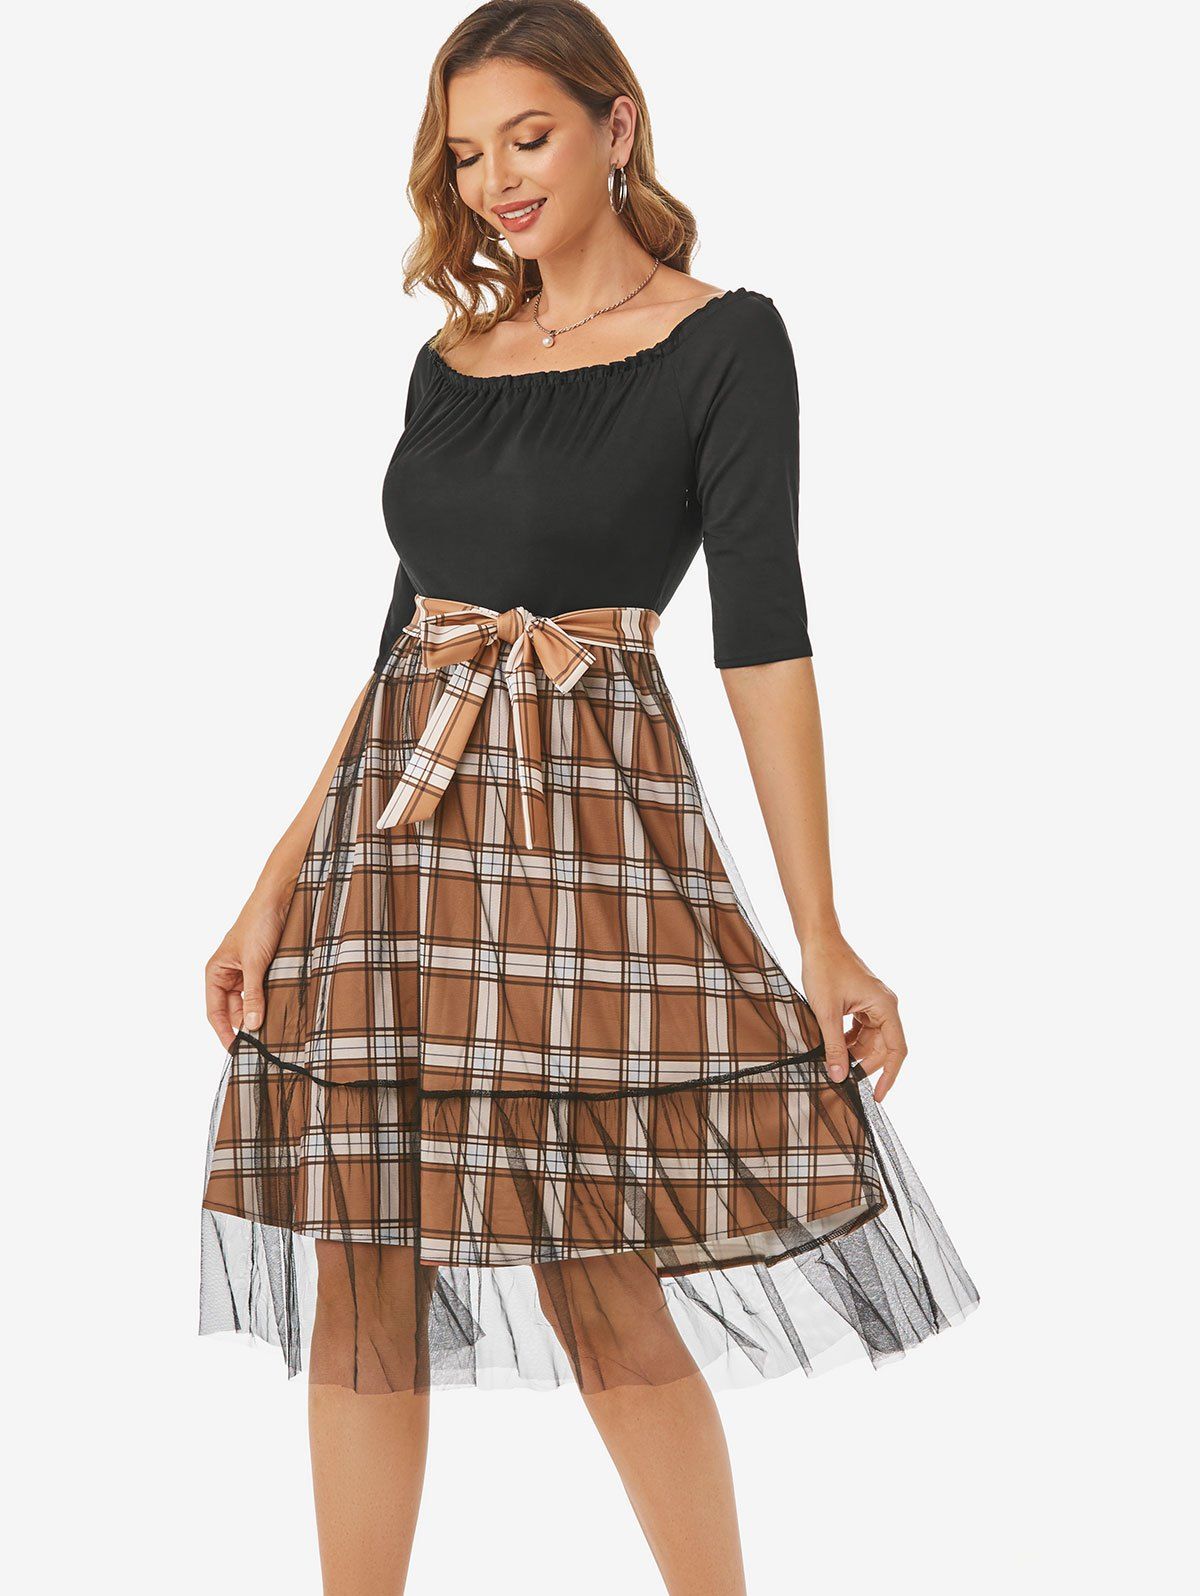 Sheer Lace Overlay Plaid Print Combo Dress Half Sleeve Belted A Line Dress Ruffled Scoop Neck Dress 